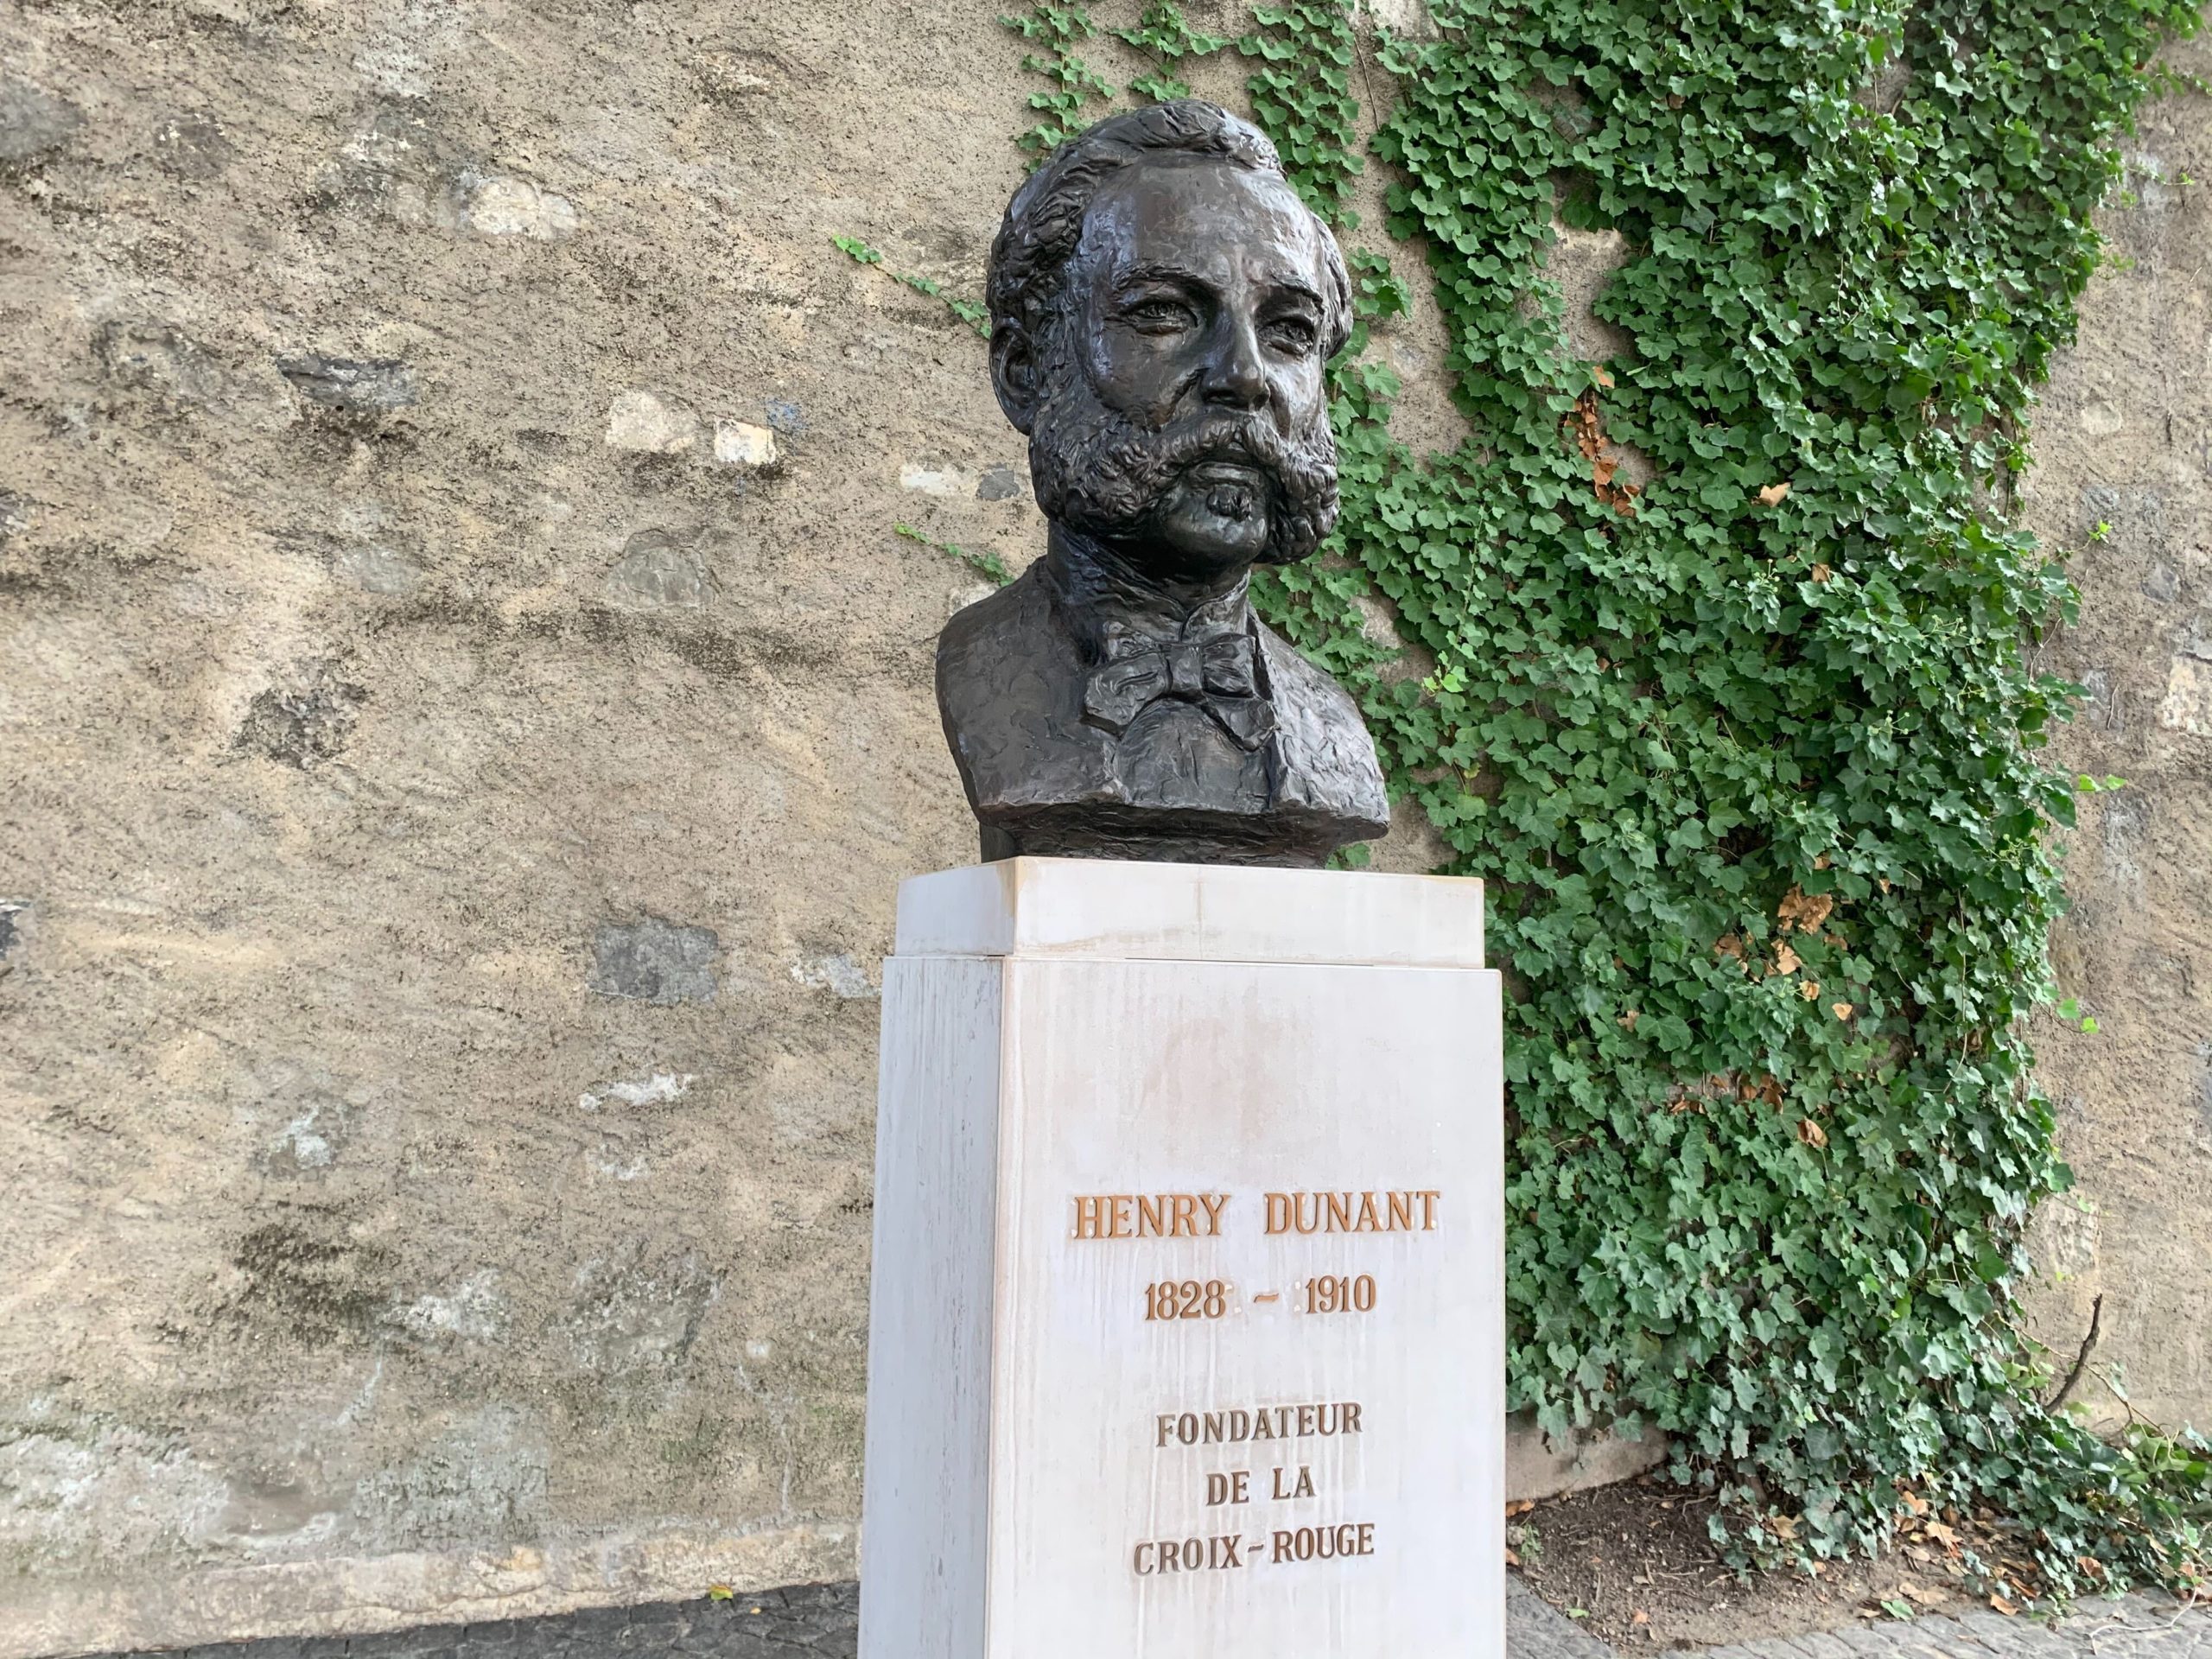 Bust of Henry Dunant - Picture Céline Saugy